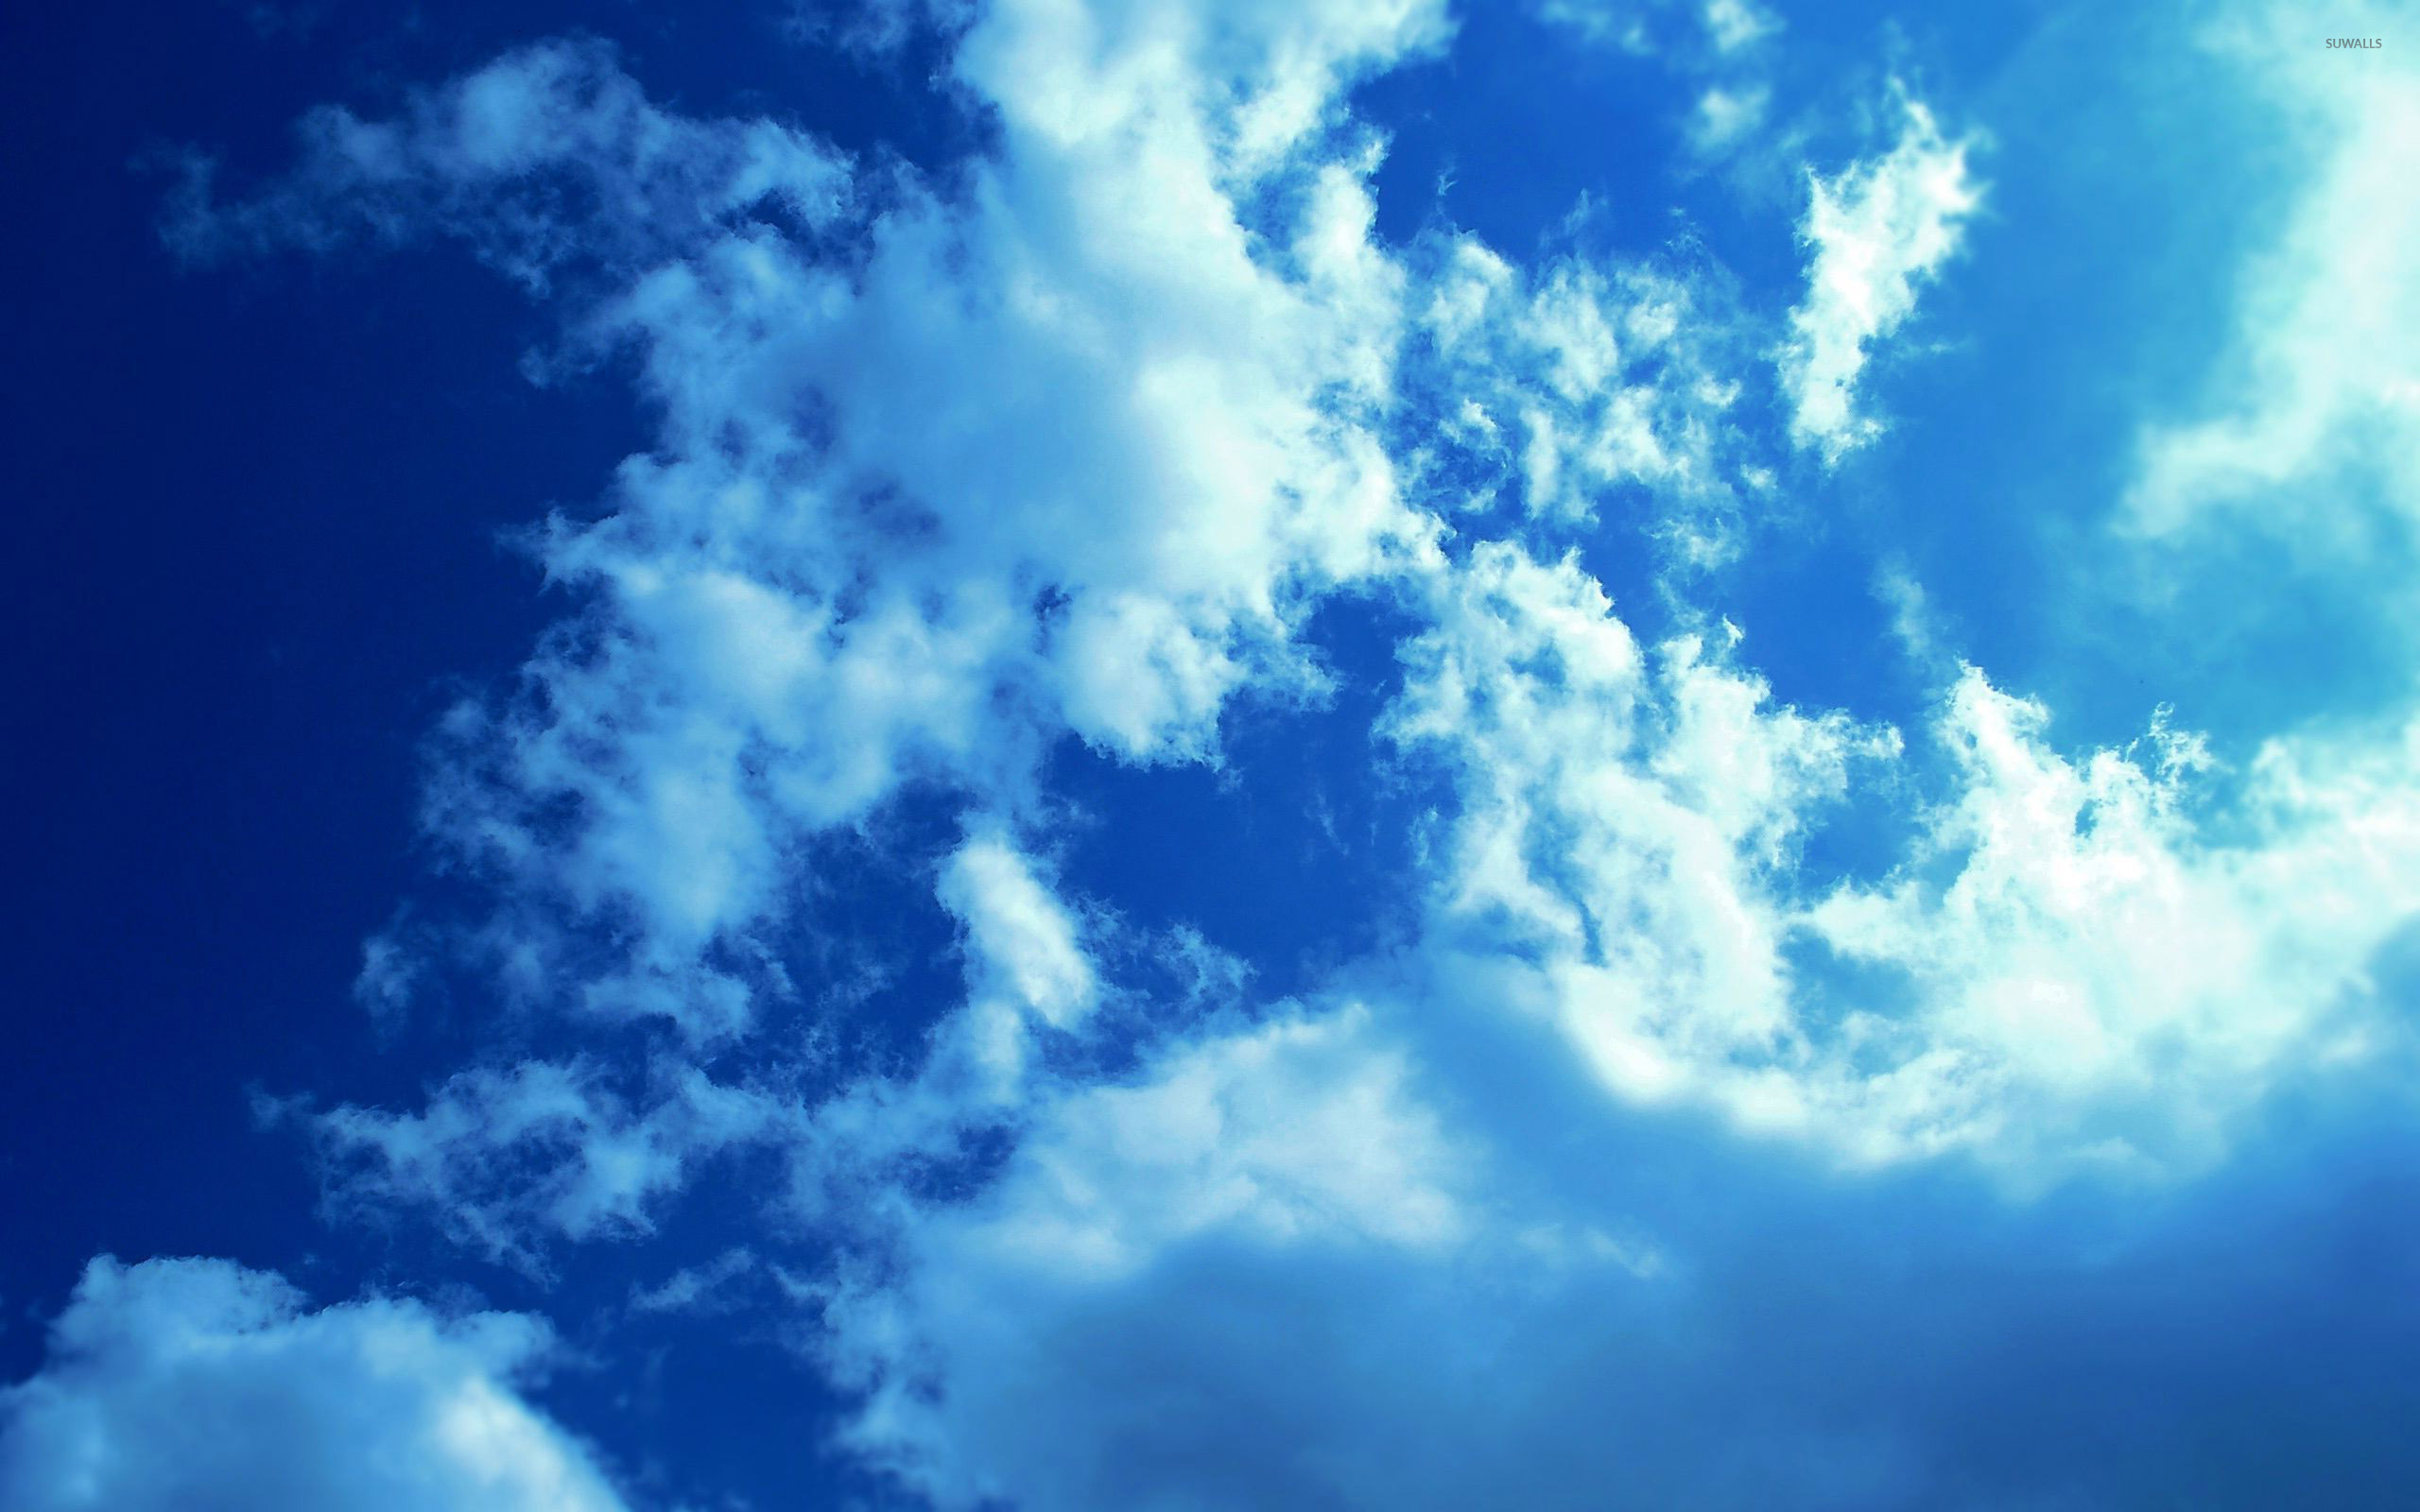 White clouds and blue sky wallpaper - Nature wallpapers - #28522